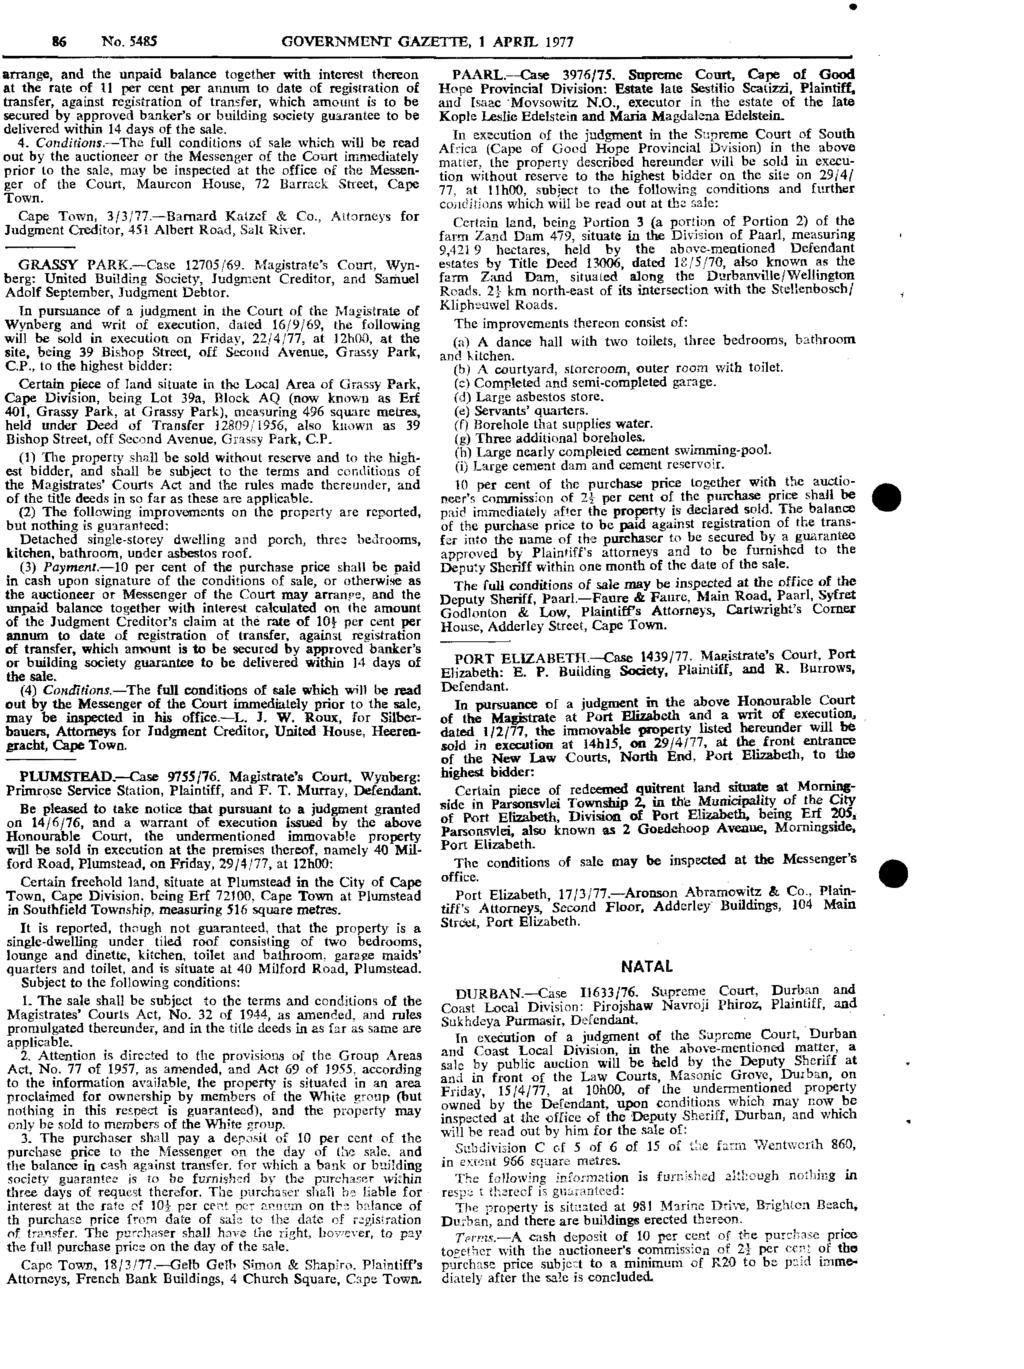 No. S48S GOVERNMENT GAZETTE, 1 APRIL 1911 arrange, and the unpaid balance together with interest thereon at the rate of 11 per cent per annum to date of registration of transfer, against registration